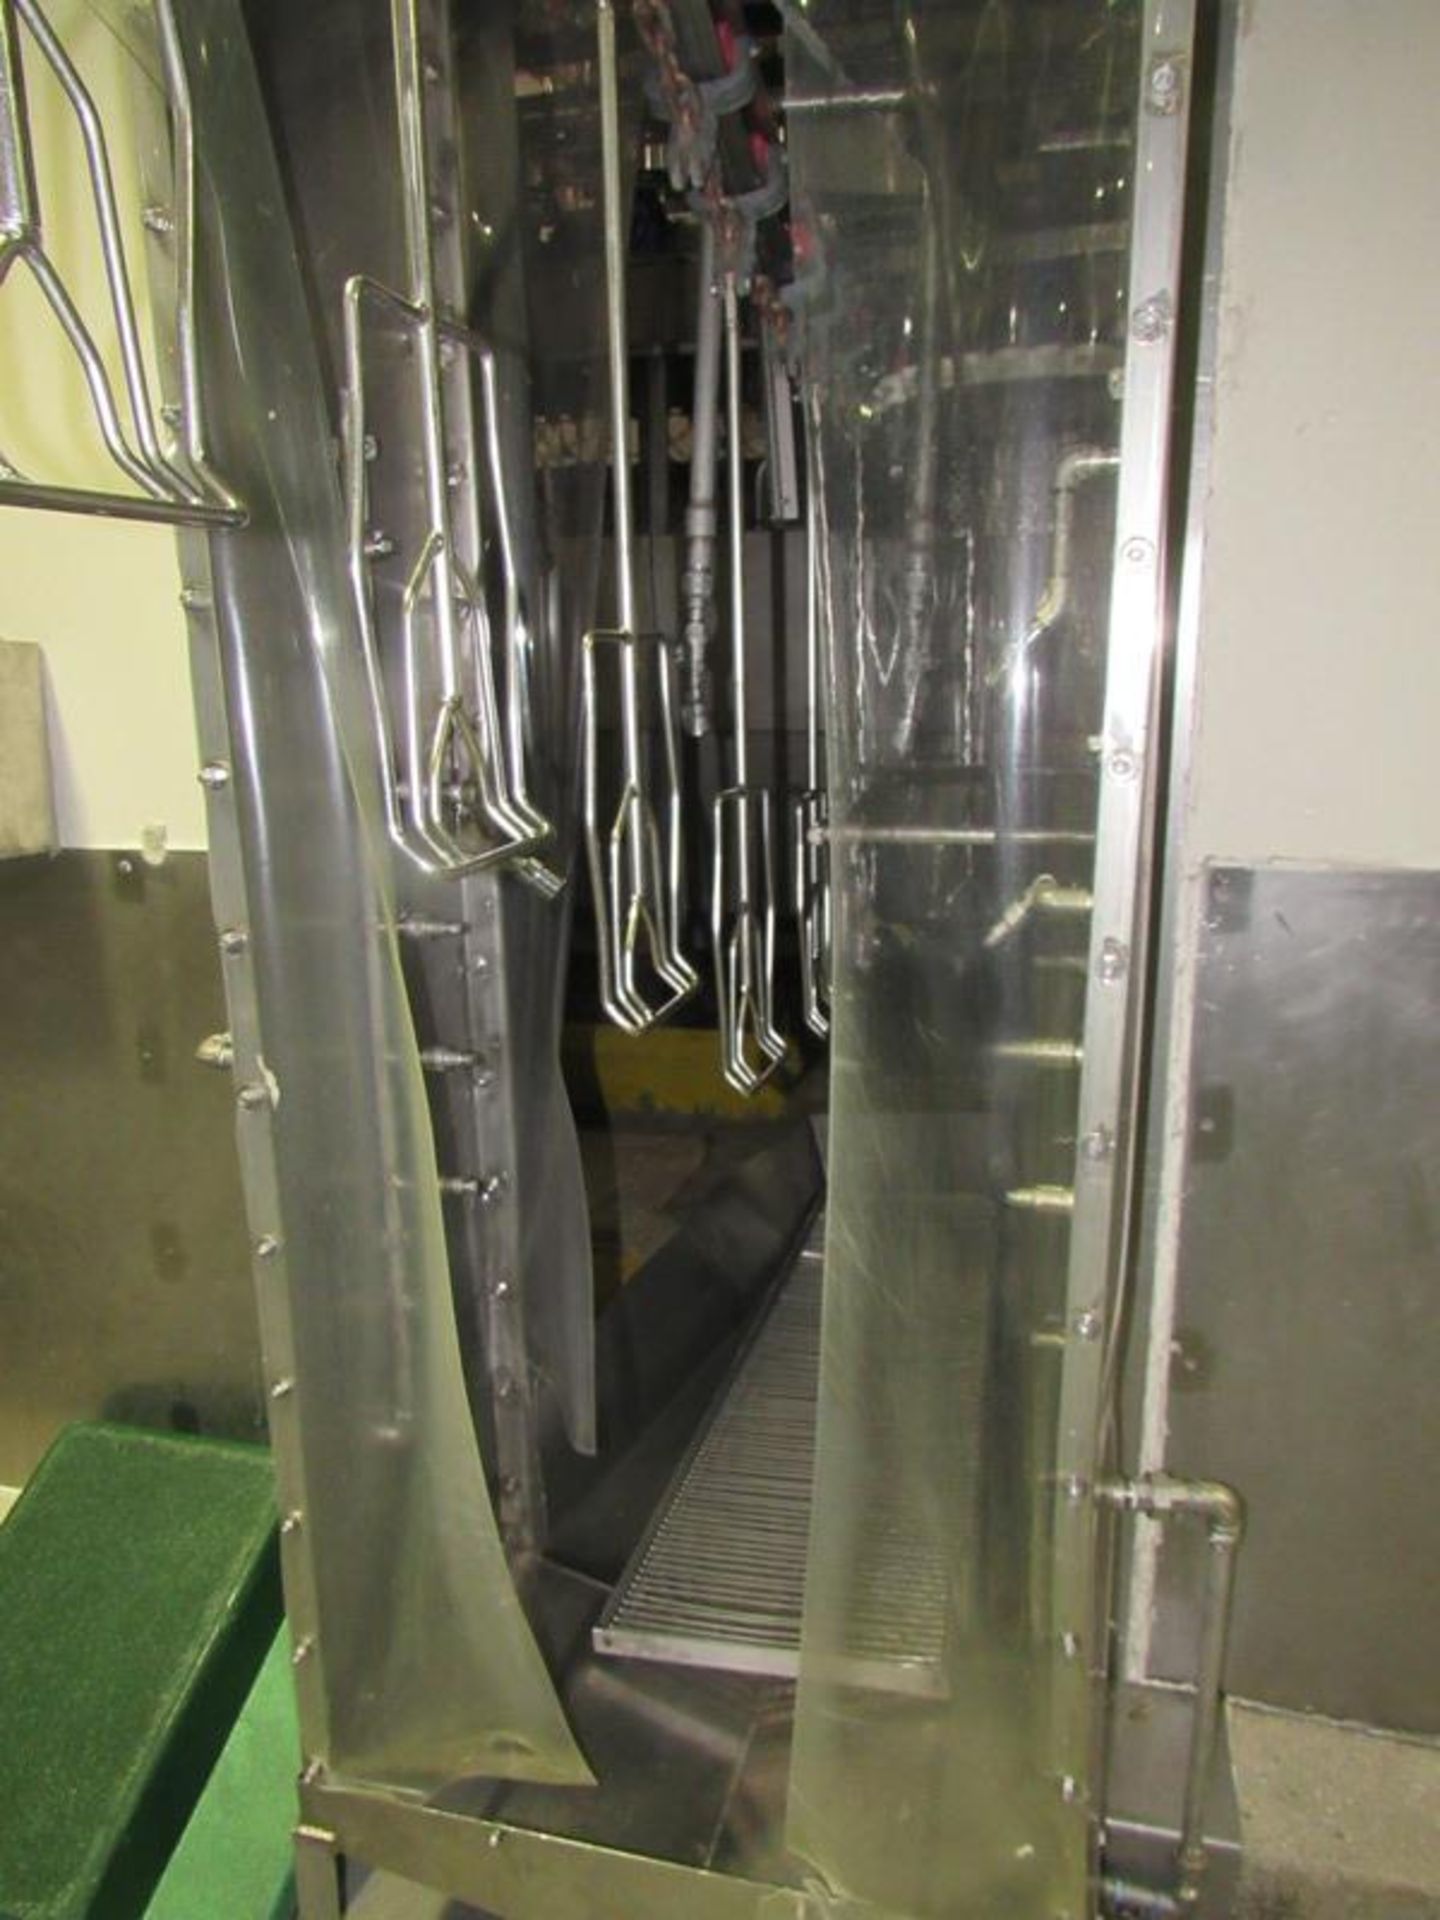 Stainless Steel Spray Cabinet, 3' W X 7' T, stainless steel spray bars each side, 7 | Rig Fee: $75 - Image 2 of 3